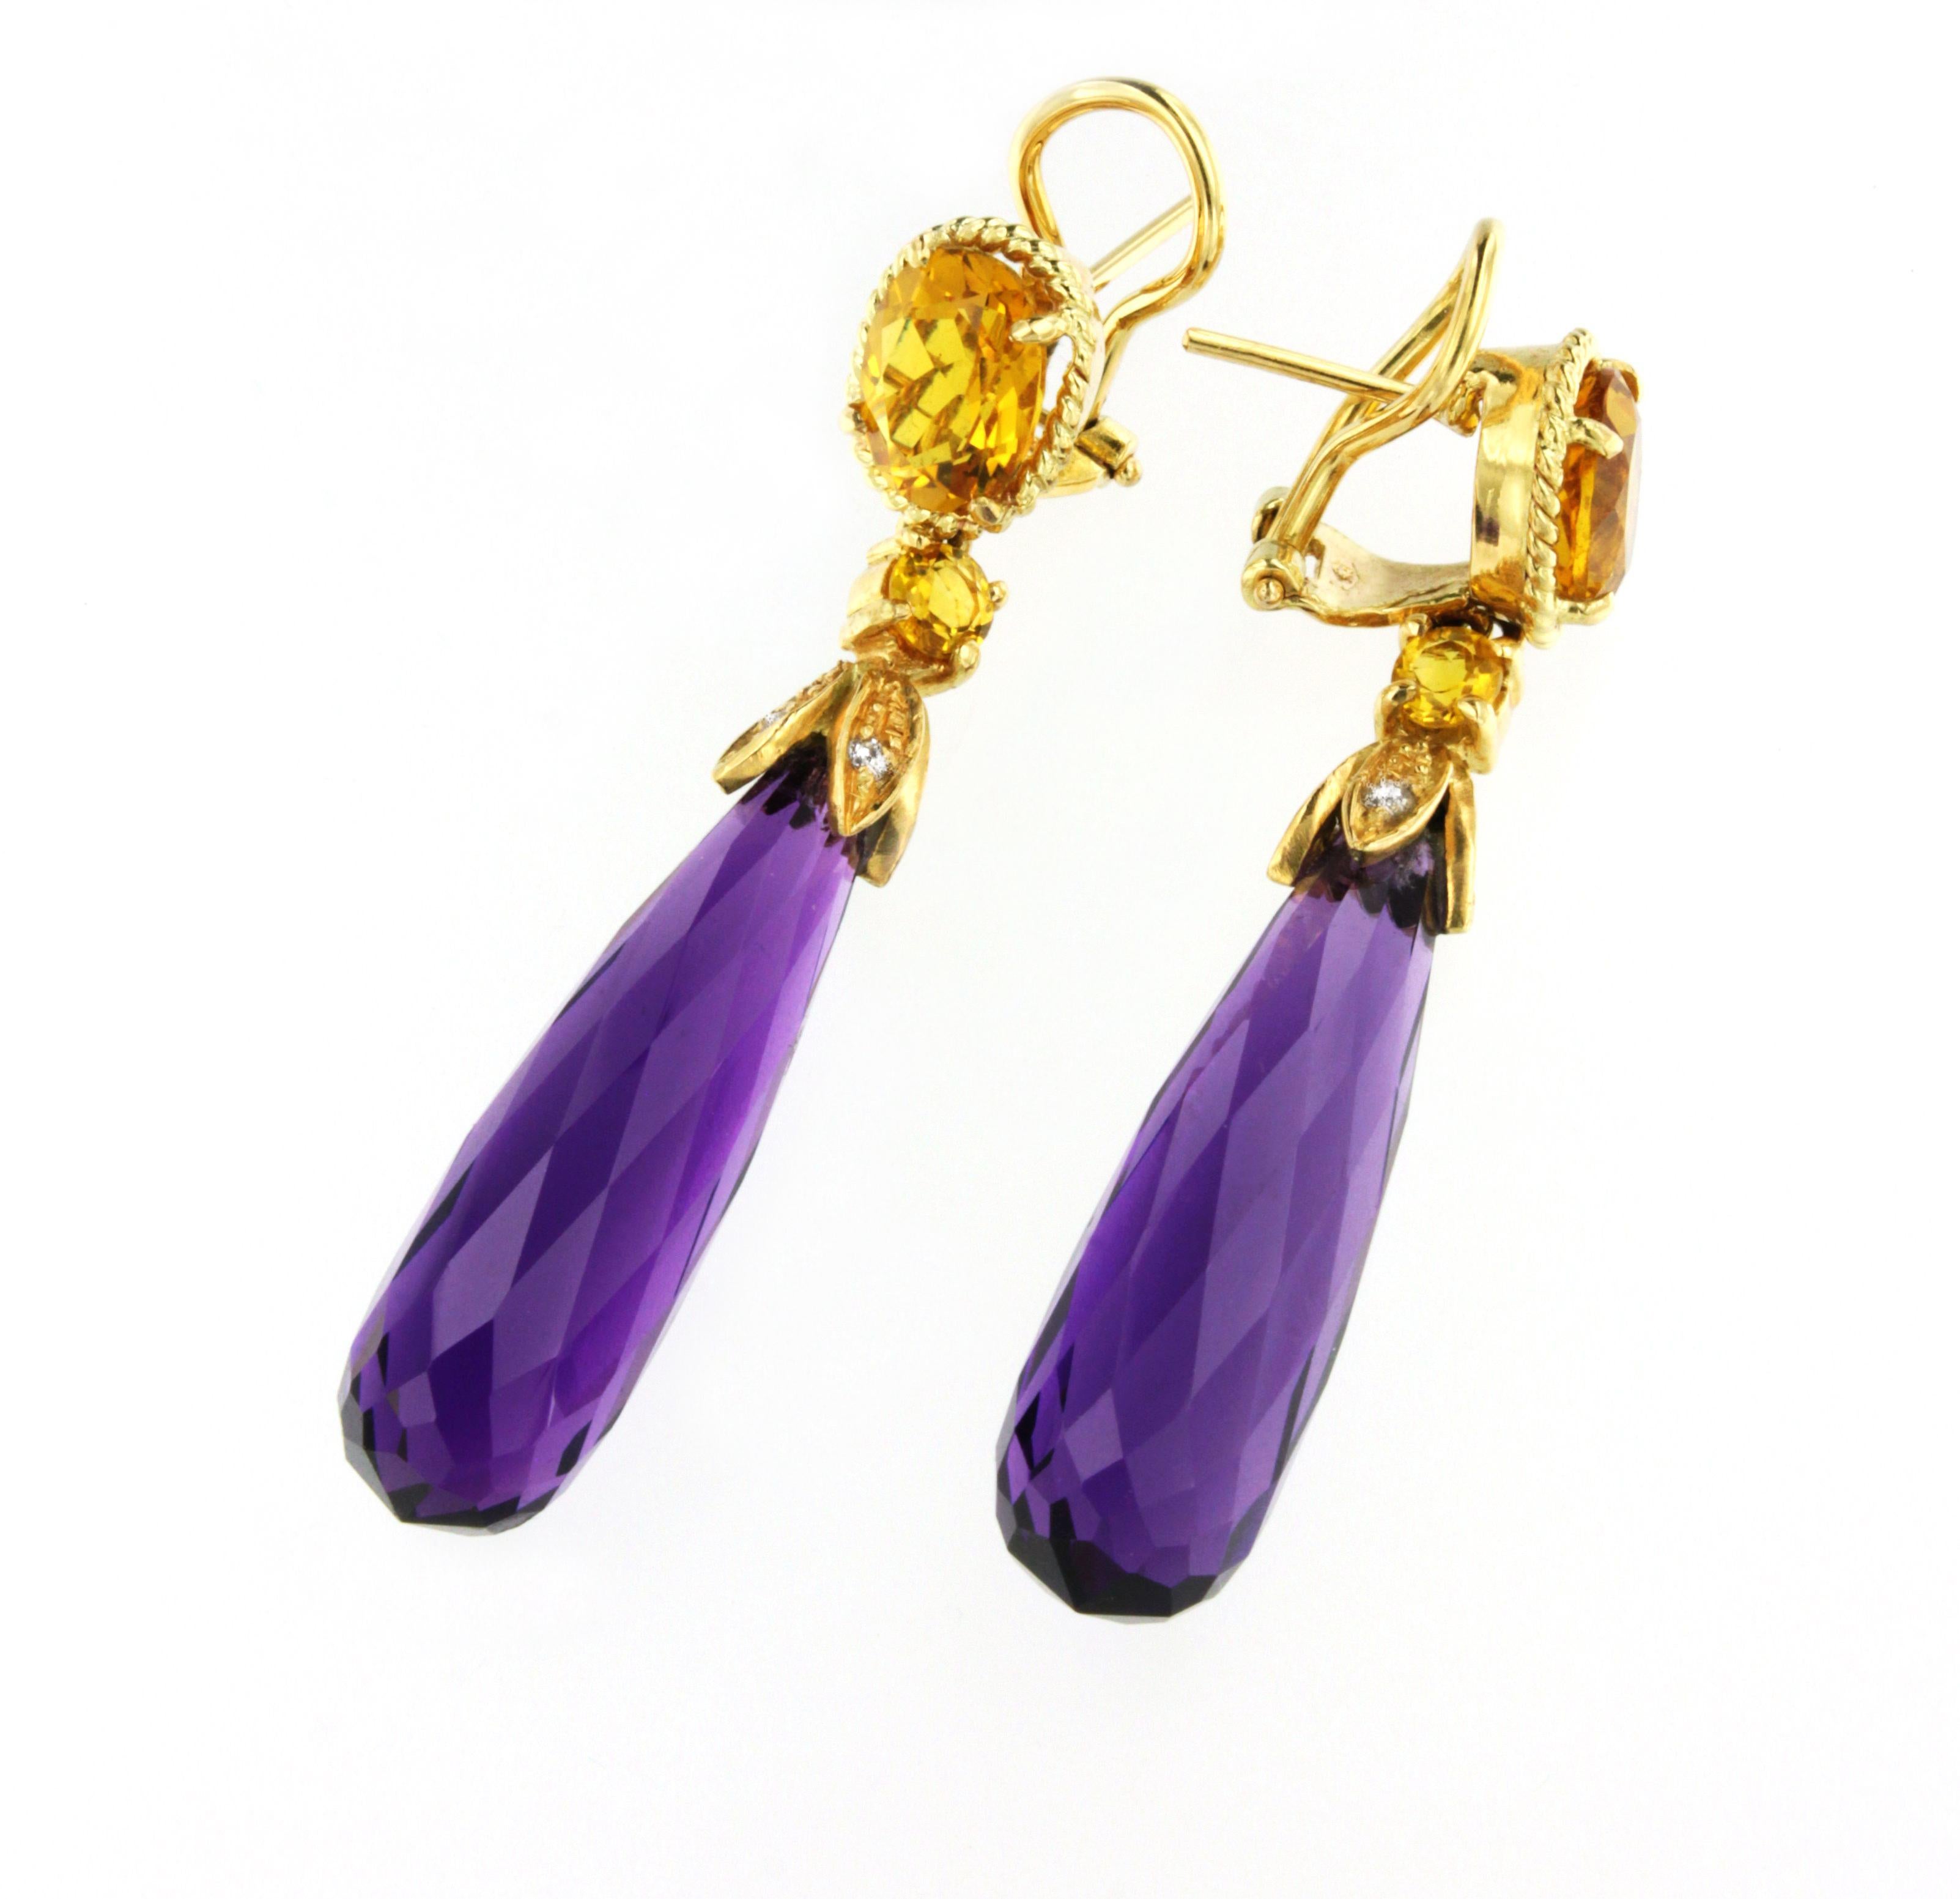 Classical designs with natural stones , suitaible for any occasion.
Made in Italy by Stanoppi Jewellery since 1948
Earrings in 18k yellow gold with Amethyst (drop cut, size: mm), Citrine (oval cut, size: mm) and white Diamonds cts 0.08 VS colour